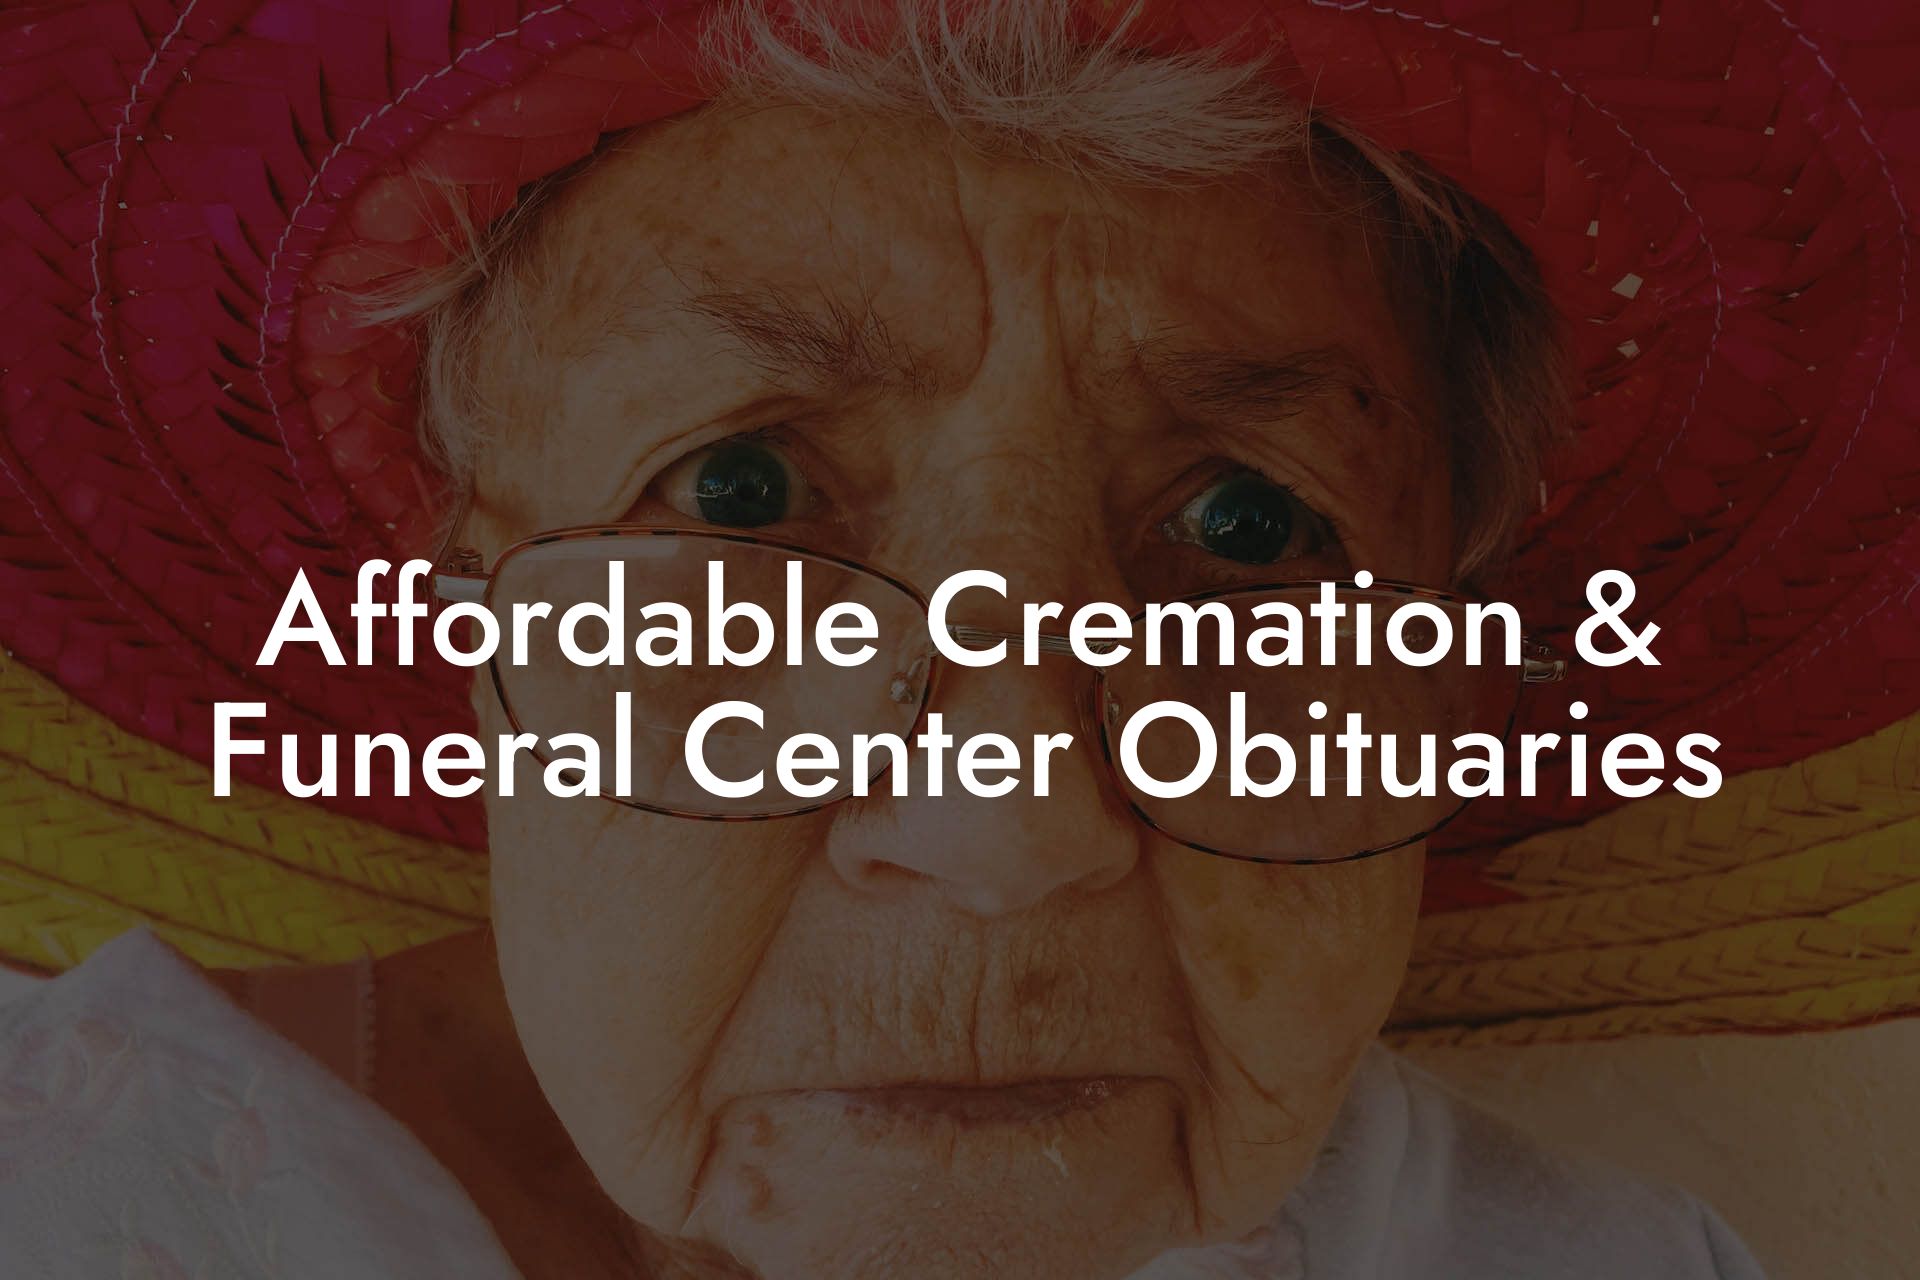 Affordable Cremation & Funeral Center Obituaries